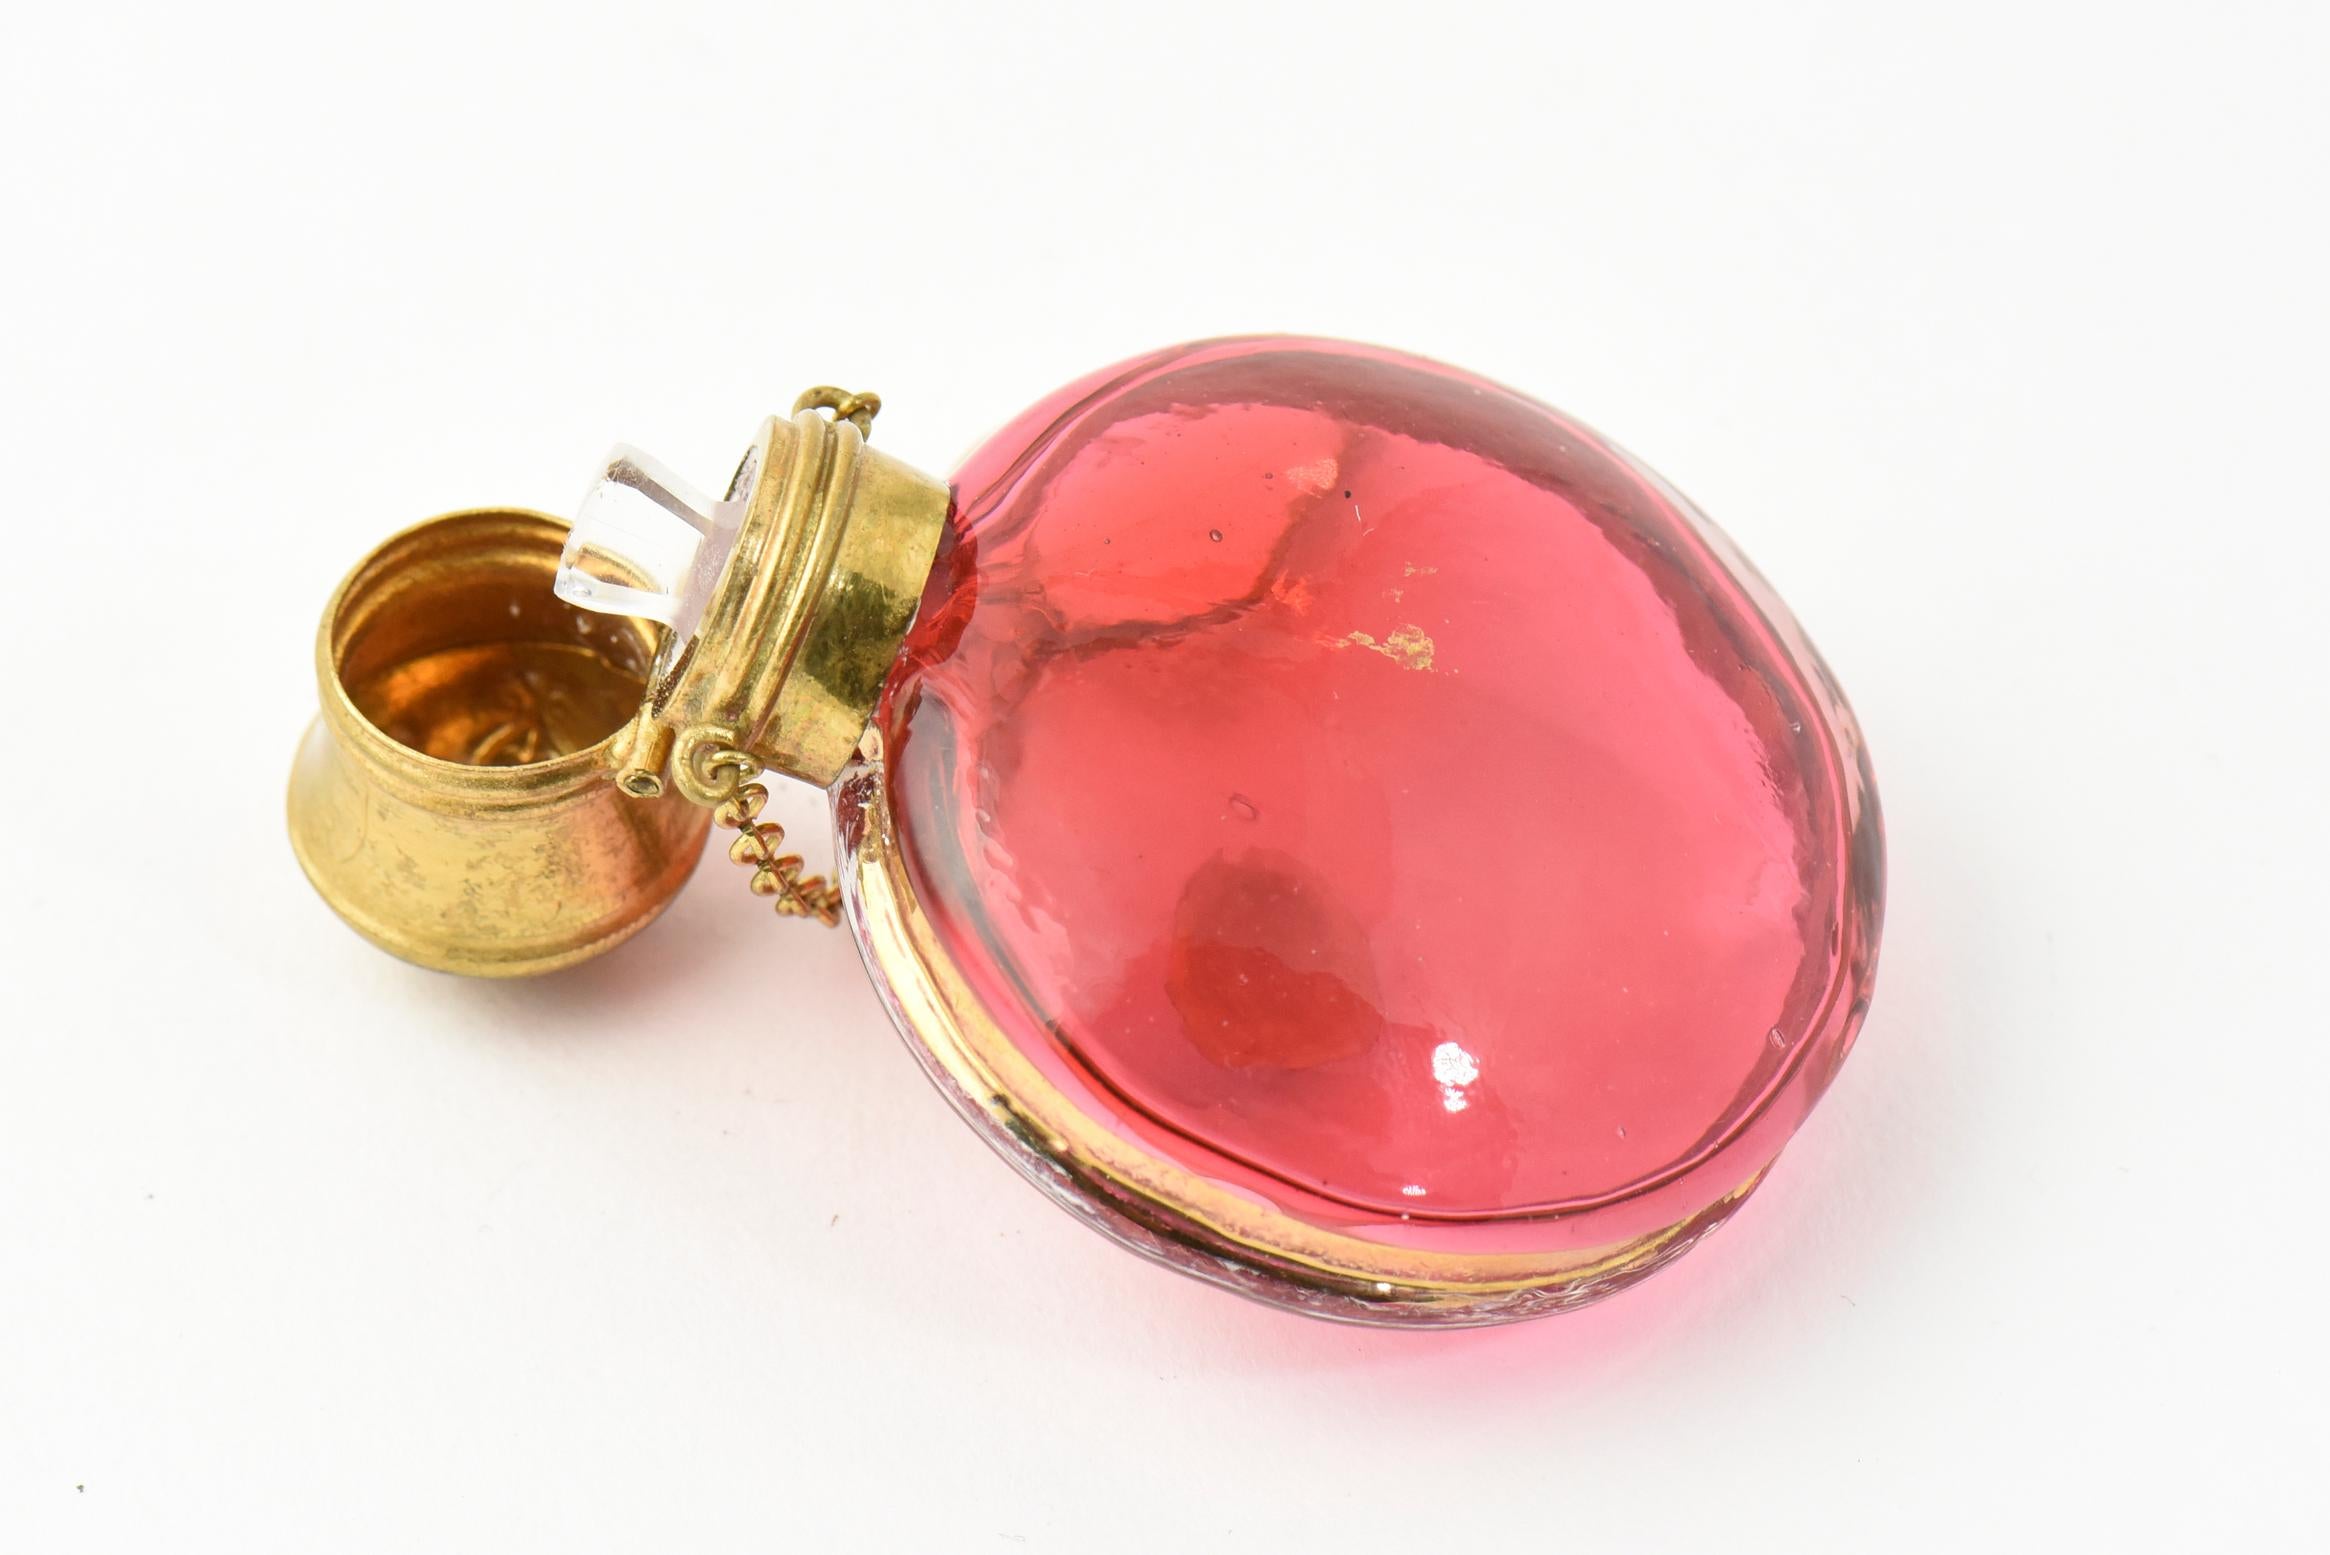 Victorian Antique Bohemian Cranberry Gilt Perfume Bottle with Chatelaine Finger Chain